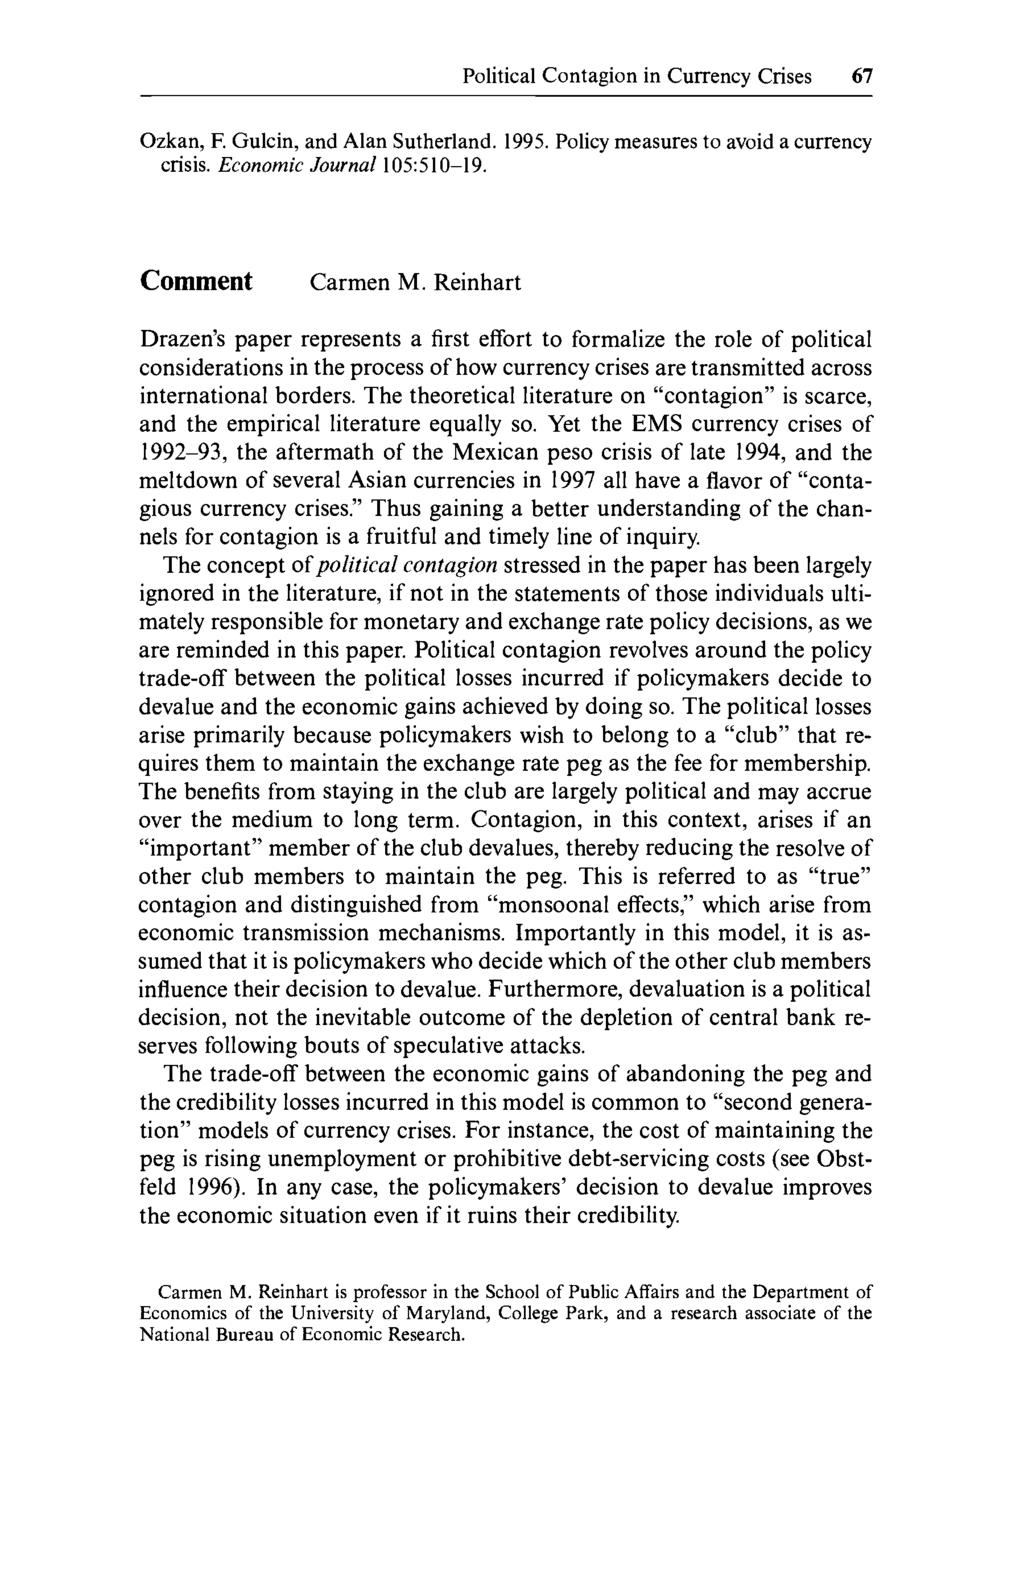 Political Contagion in Currency Crises 67 Ozkan, F. Gulcin, and Alan Sutherland. 1995. Policy measures to avoid a currency crisis. Economic Journal 105:510-19. Comment Carmen M.